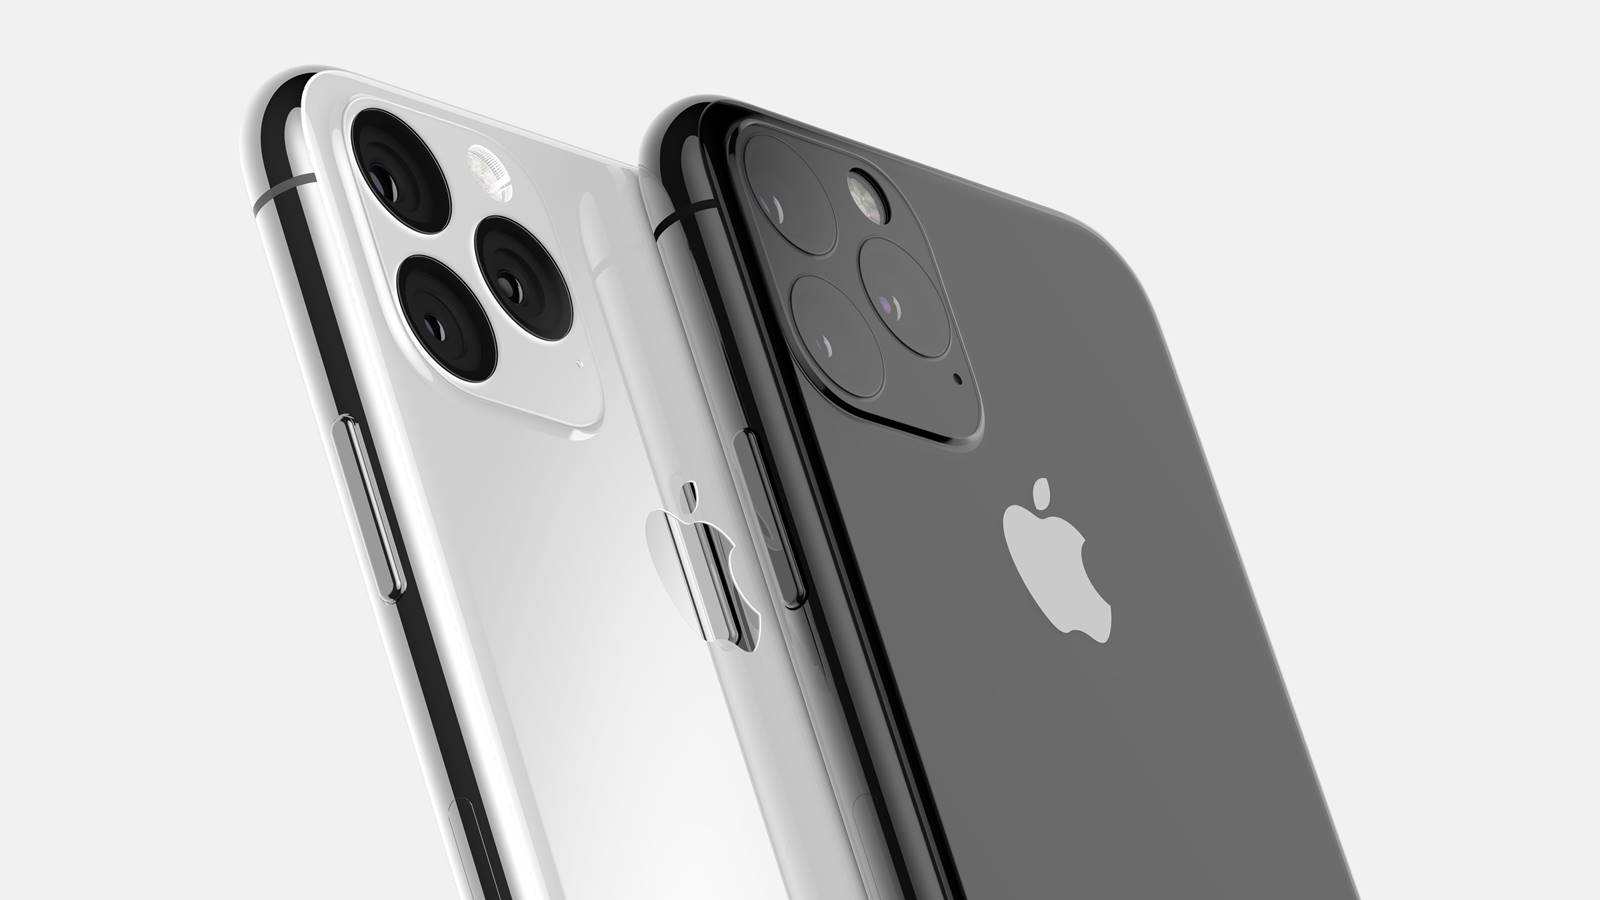 iPhone 11 mockup images